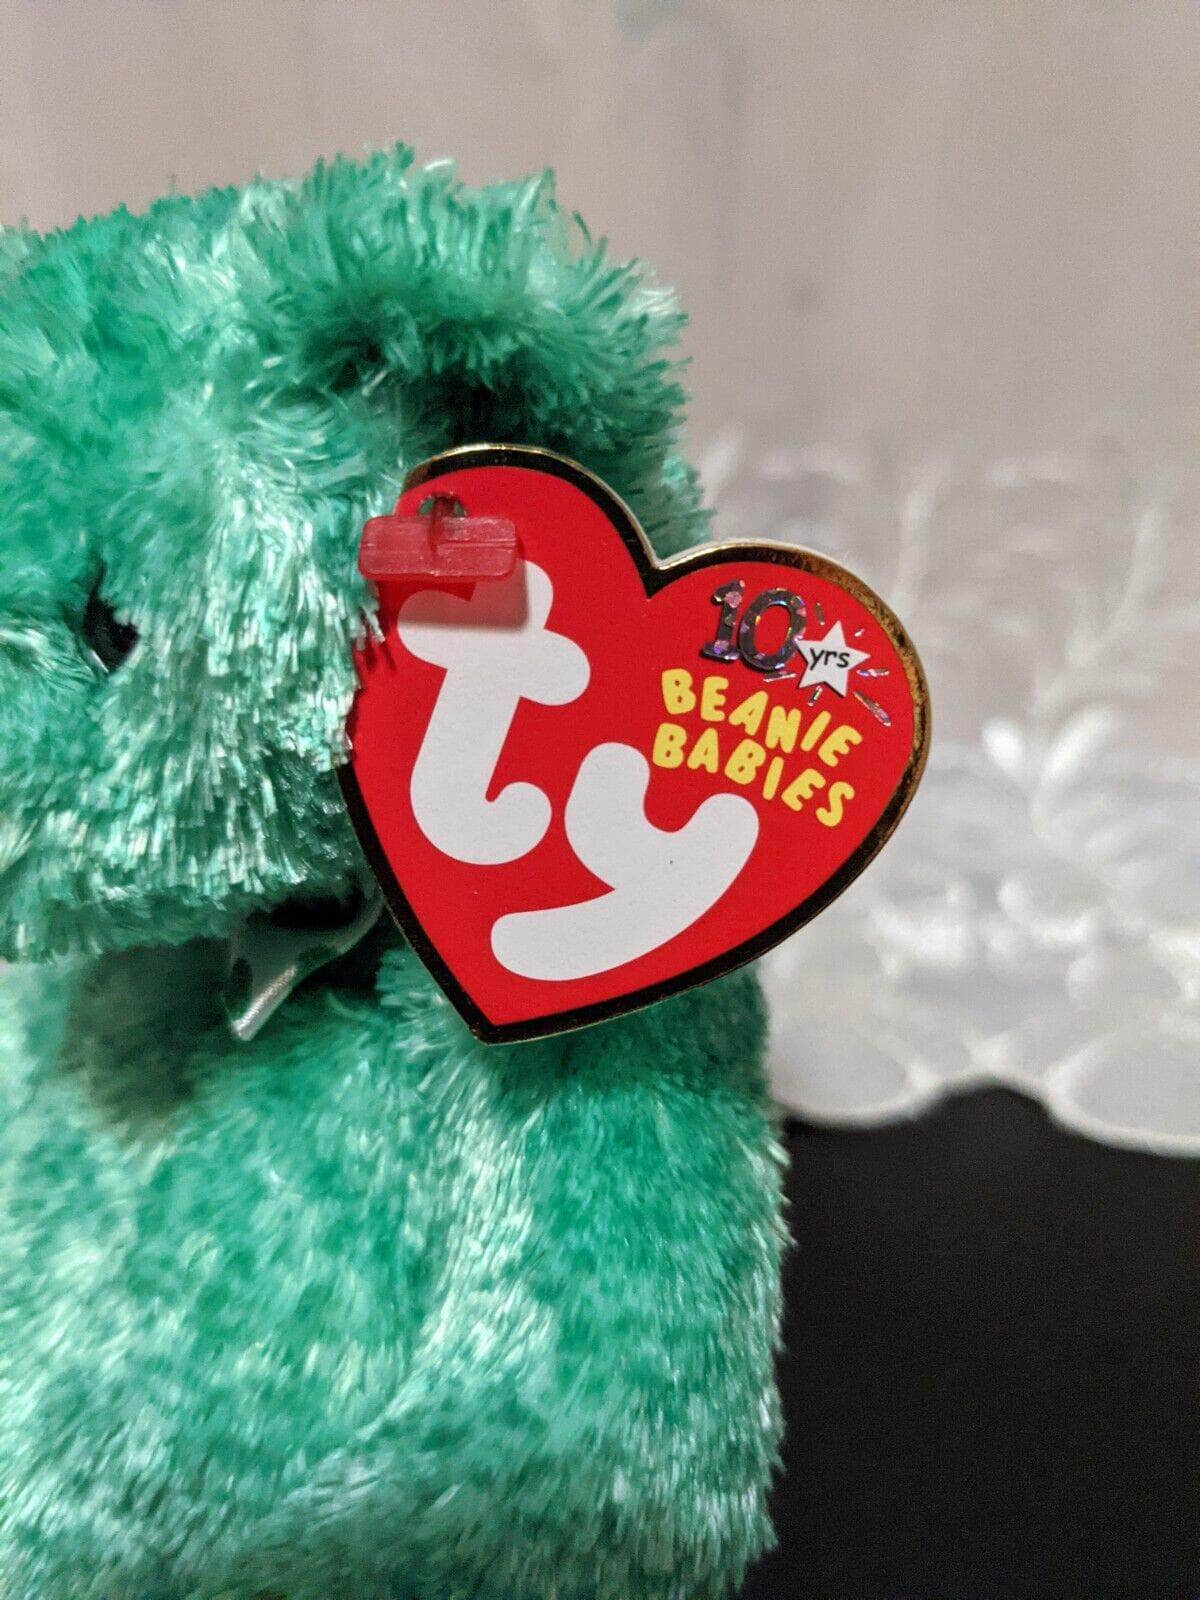 Ty Beanie Baby - LUCK-e The Green St Patrick's Day Bear (6in) - Vintage Beanies Canada